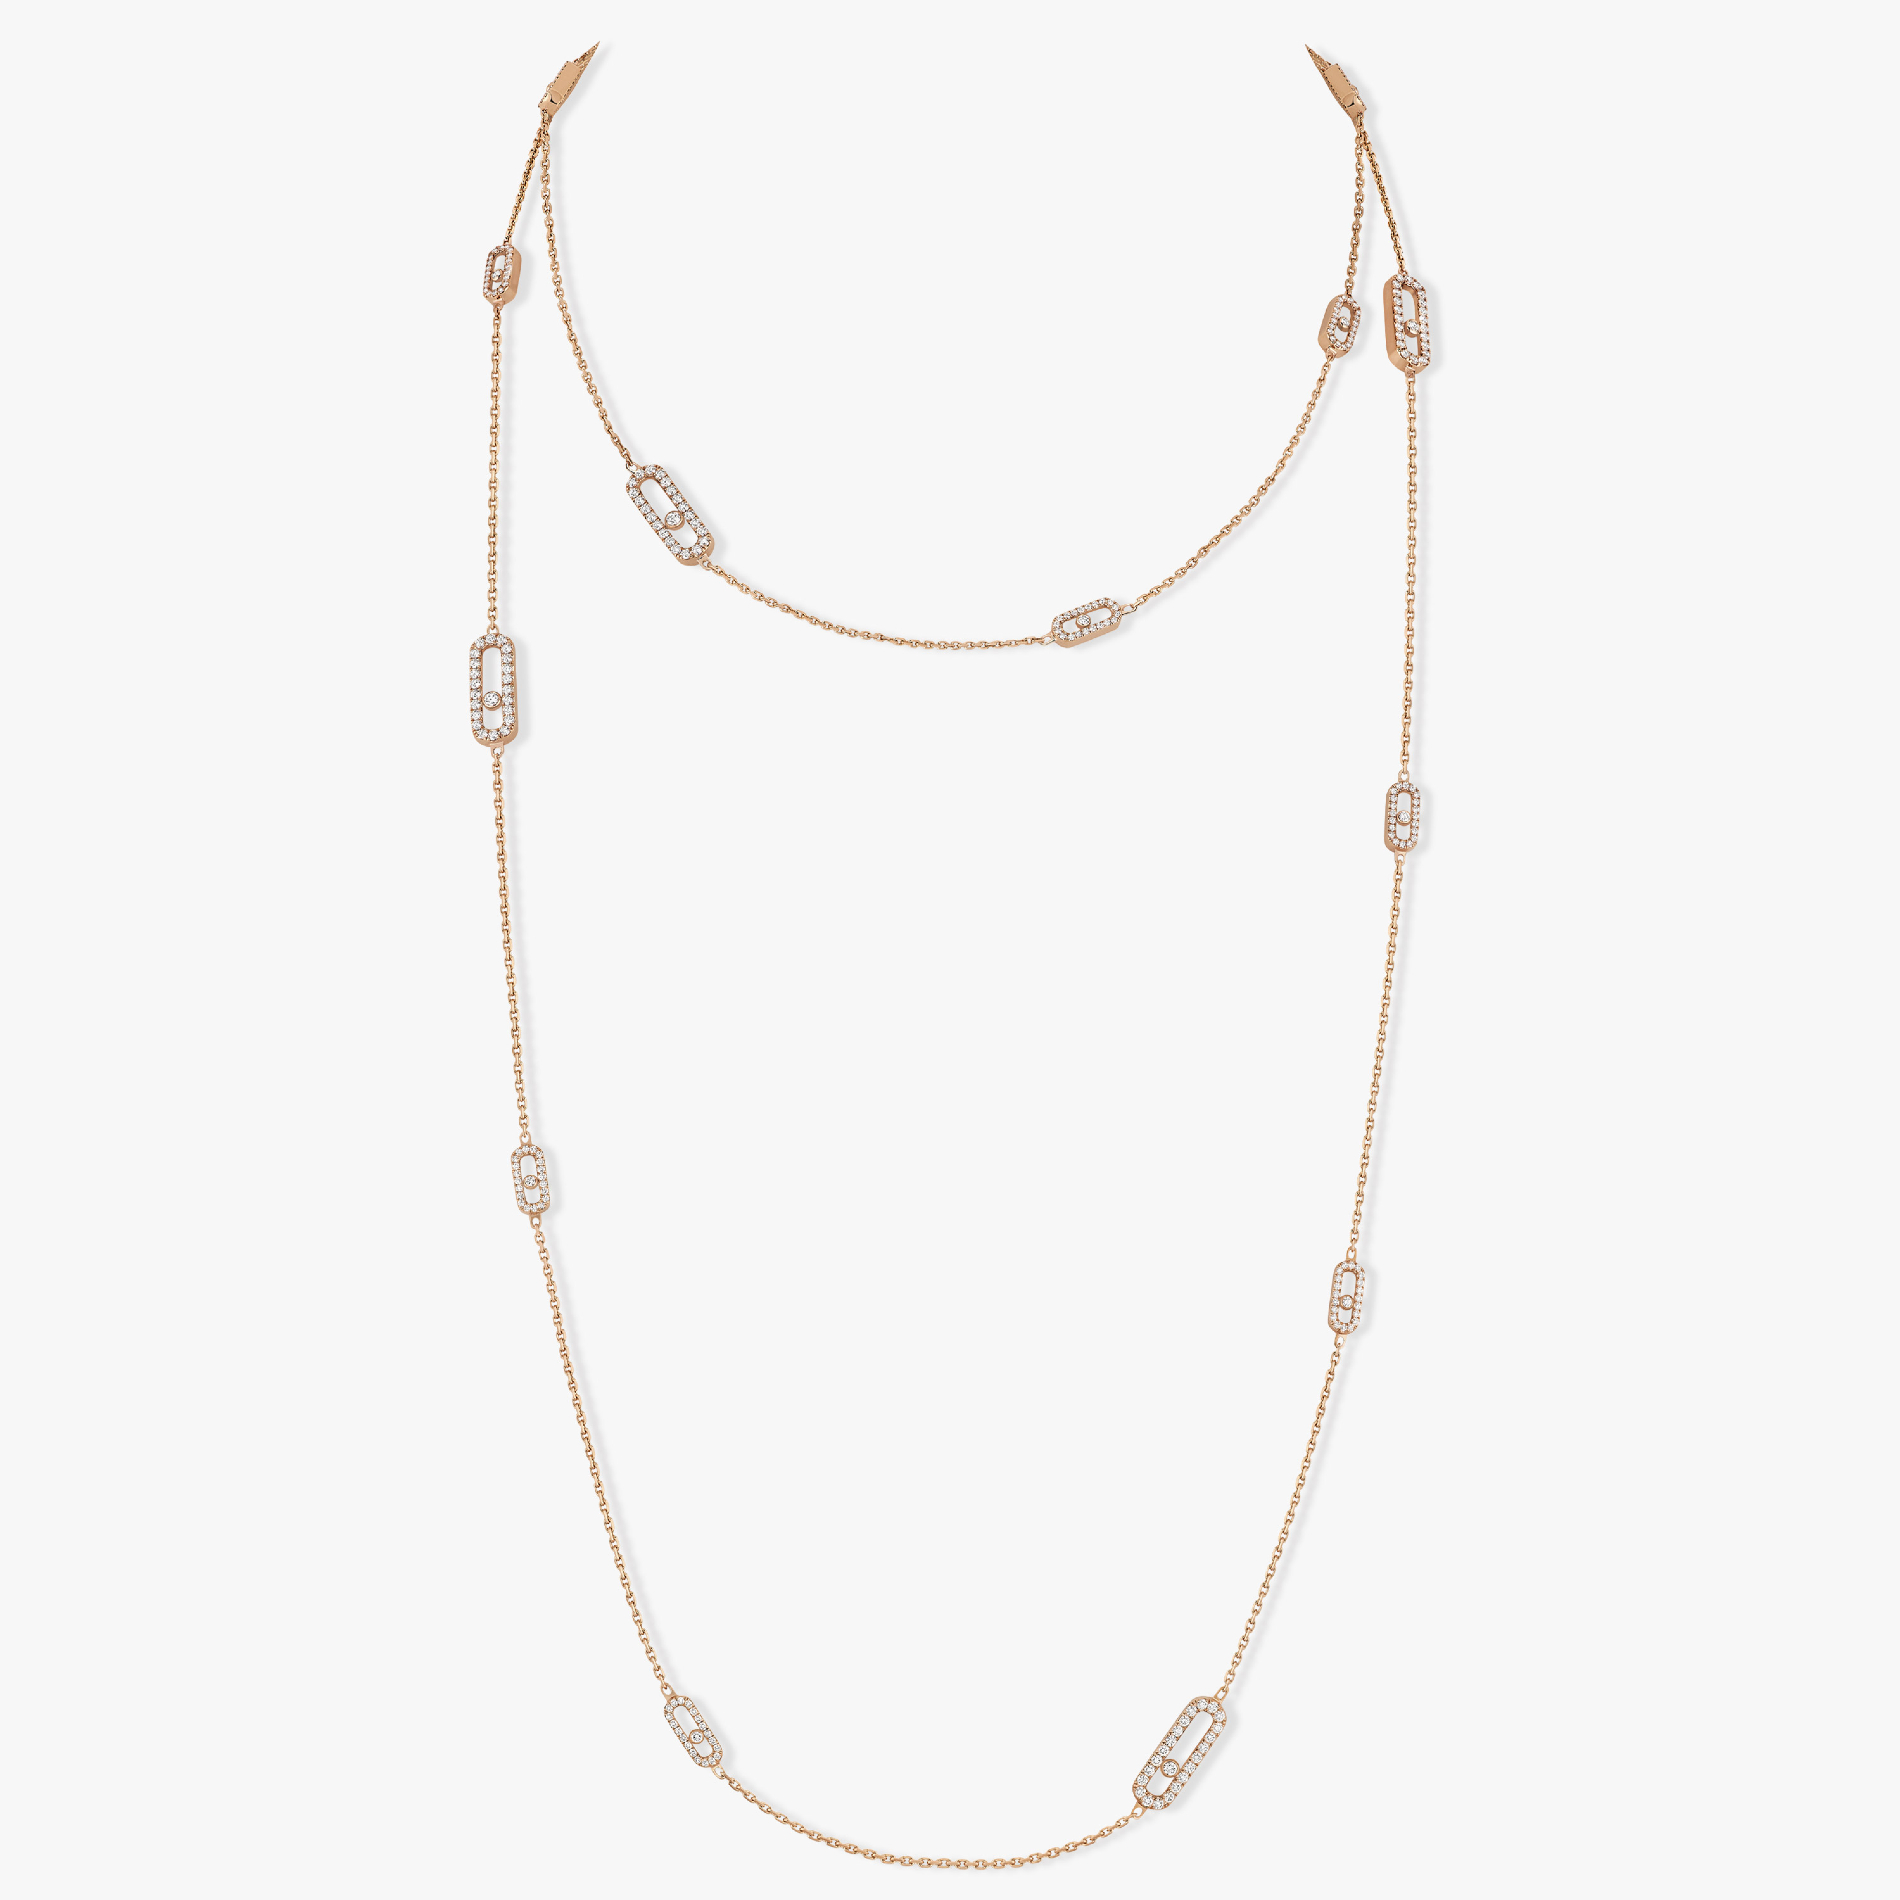 Necklace For Her Pink Gold Diamond Move Uno Long Necklace 11324-PG